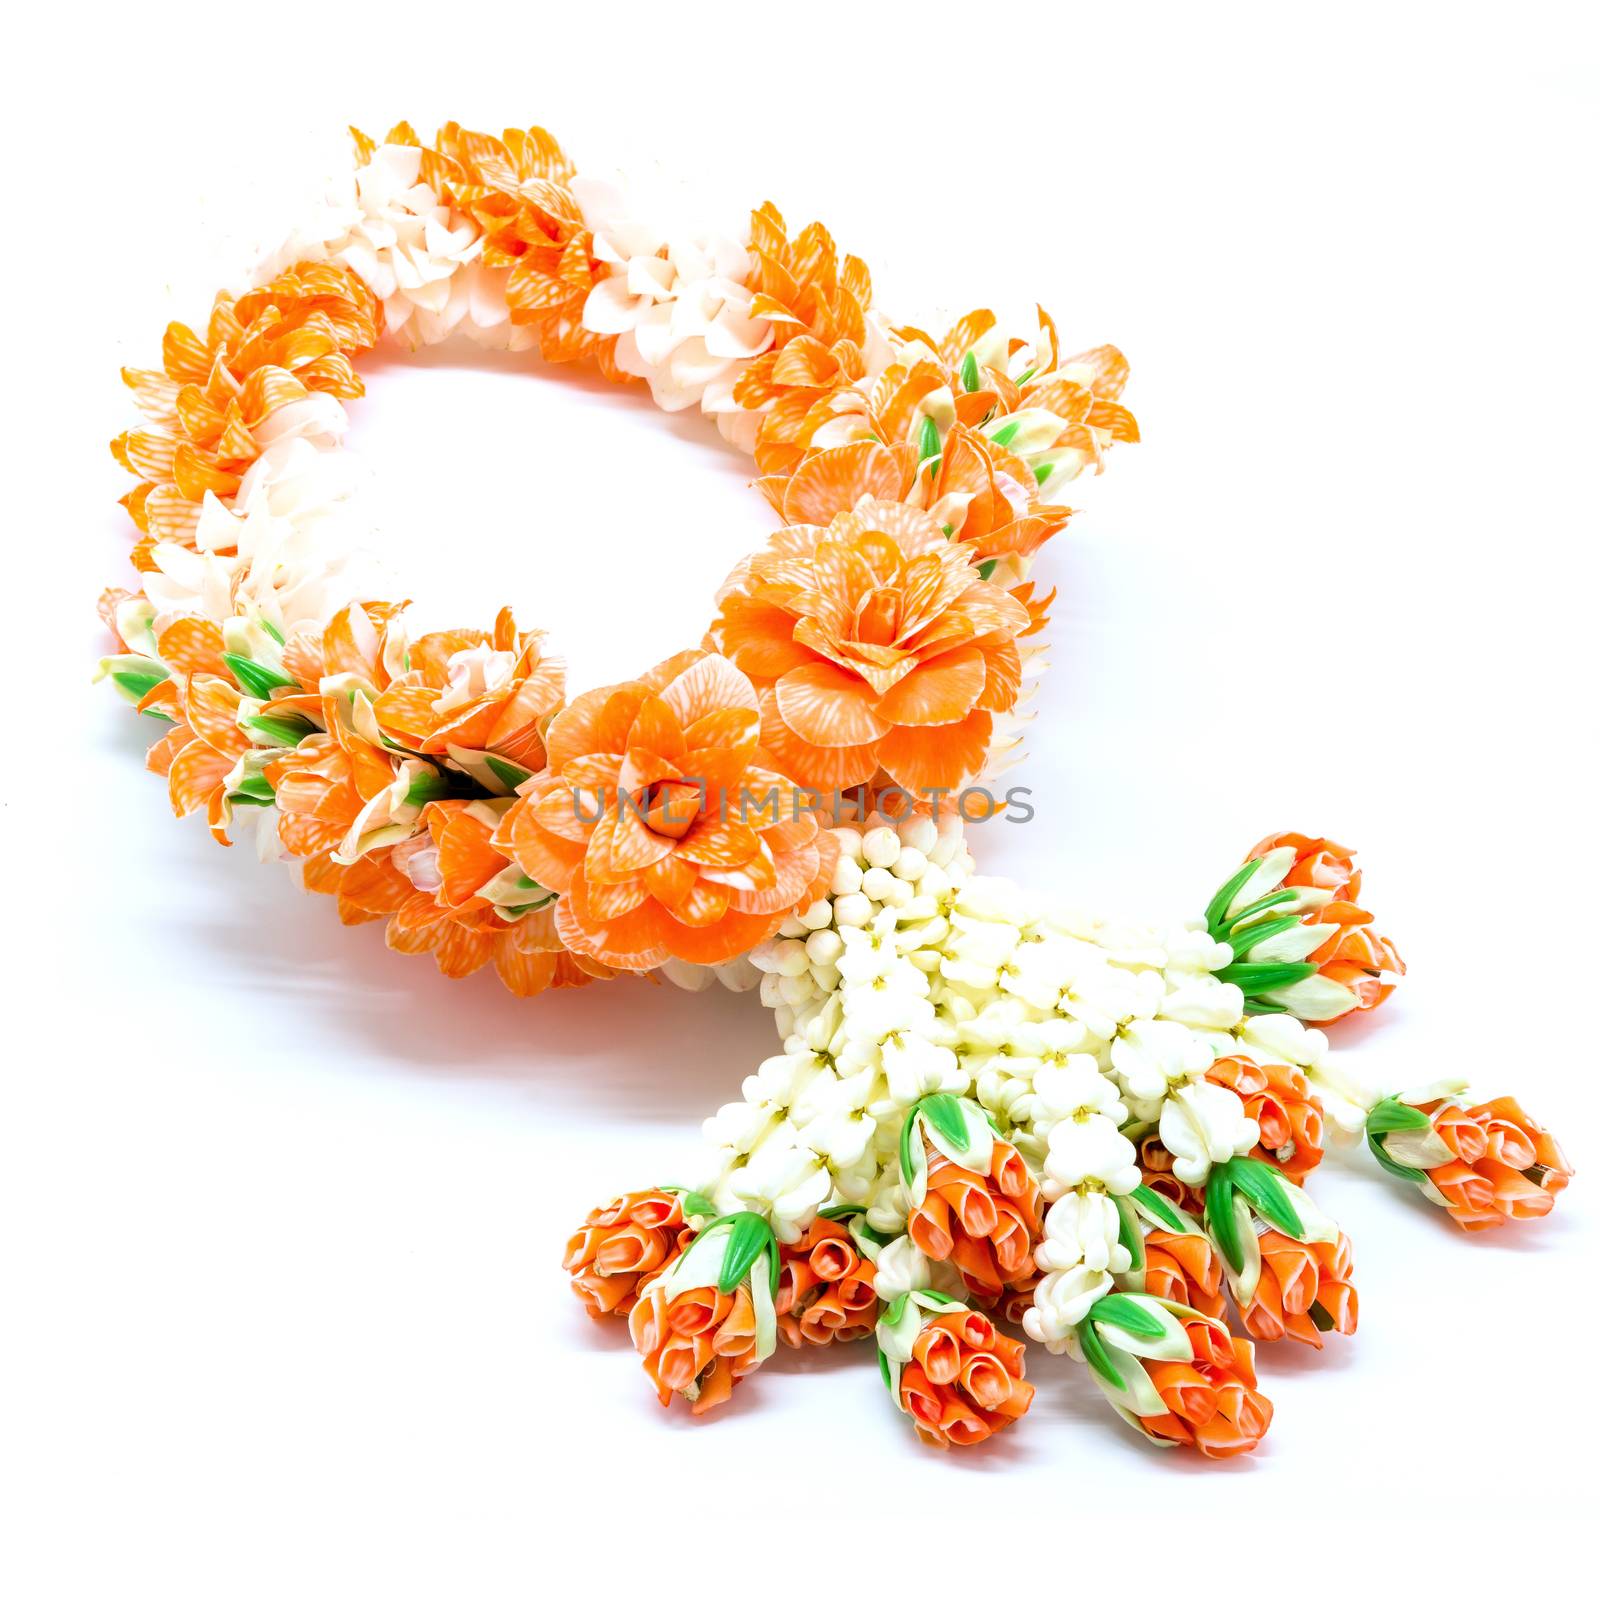 Orange garland flower in Thai style, isolated on white background, used offering to buddha 